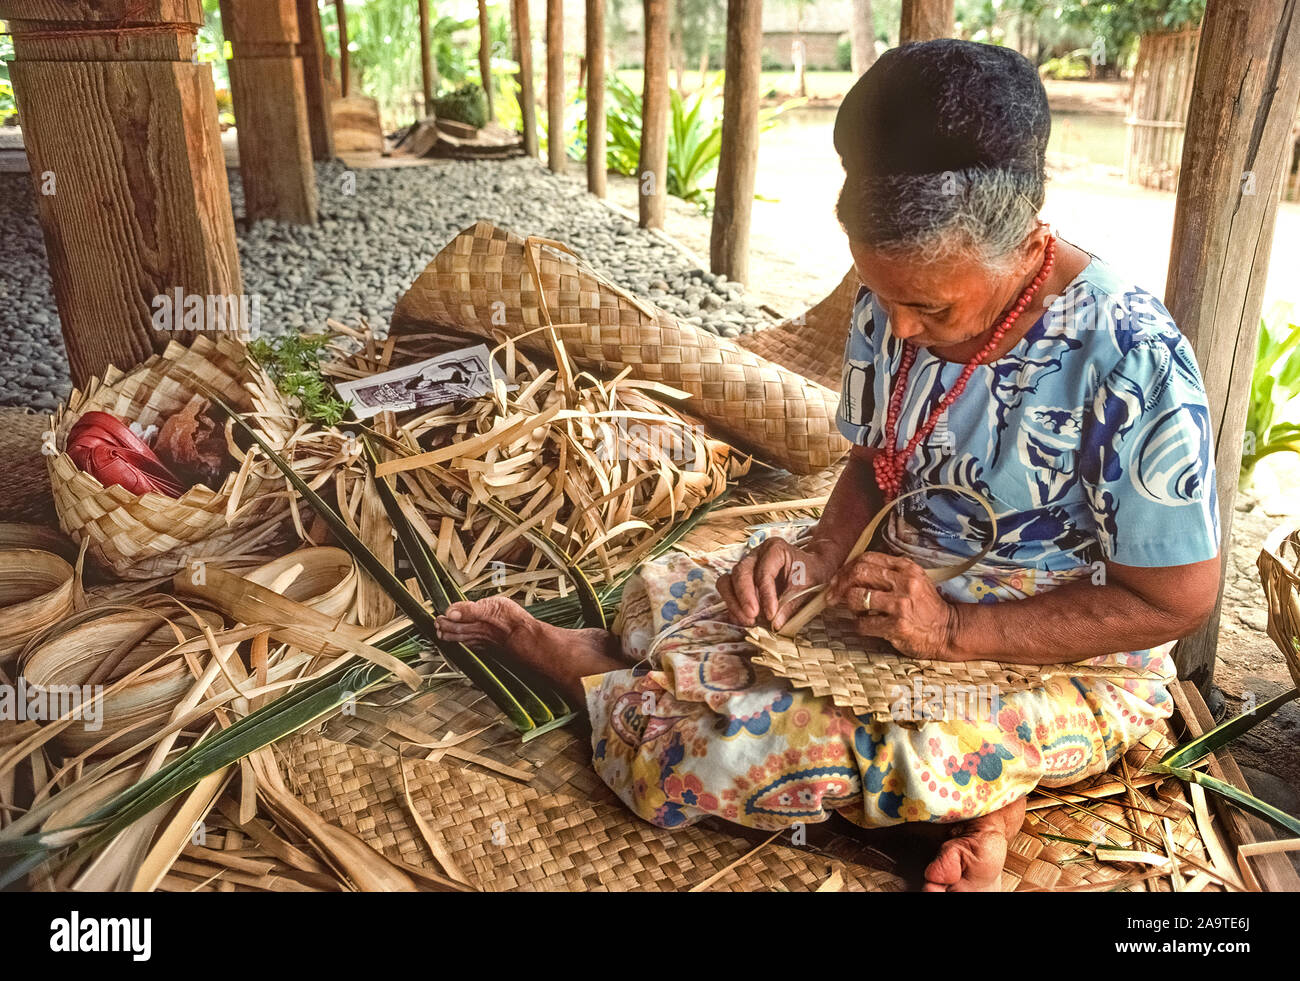 A Hawaiian woman weaves a small hand fan from the dried leaves (fronds) of a palm tree at the Polynesian Cultural Center on the northern shore of Oahu, one of the eight major islands in the Pacific Ocean that are part of the tropical state of Hawaii, USA. Other such handicrafts she makes include baskets, and large mats like the one she is sitting on. One foot rests on long and thin fresh green palm fronds that have yet to dry out prior to weaving them. Stock Photo